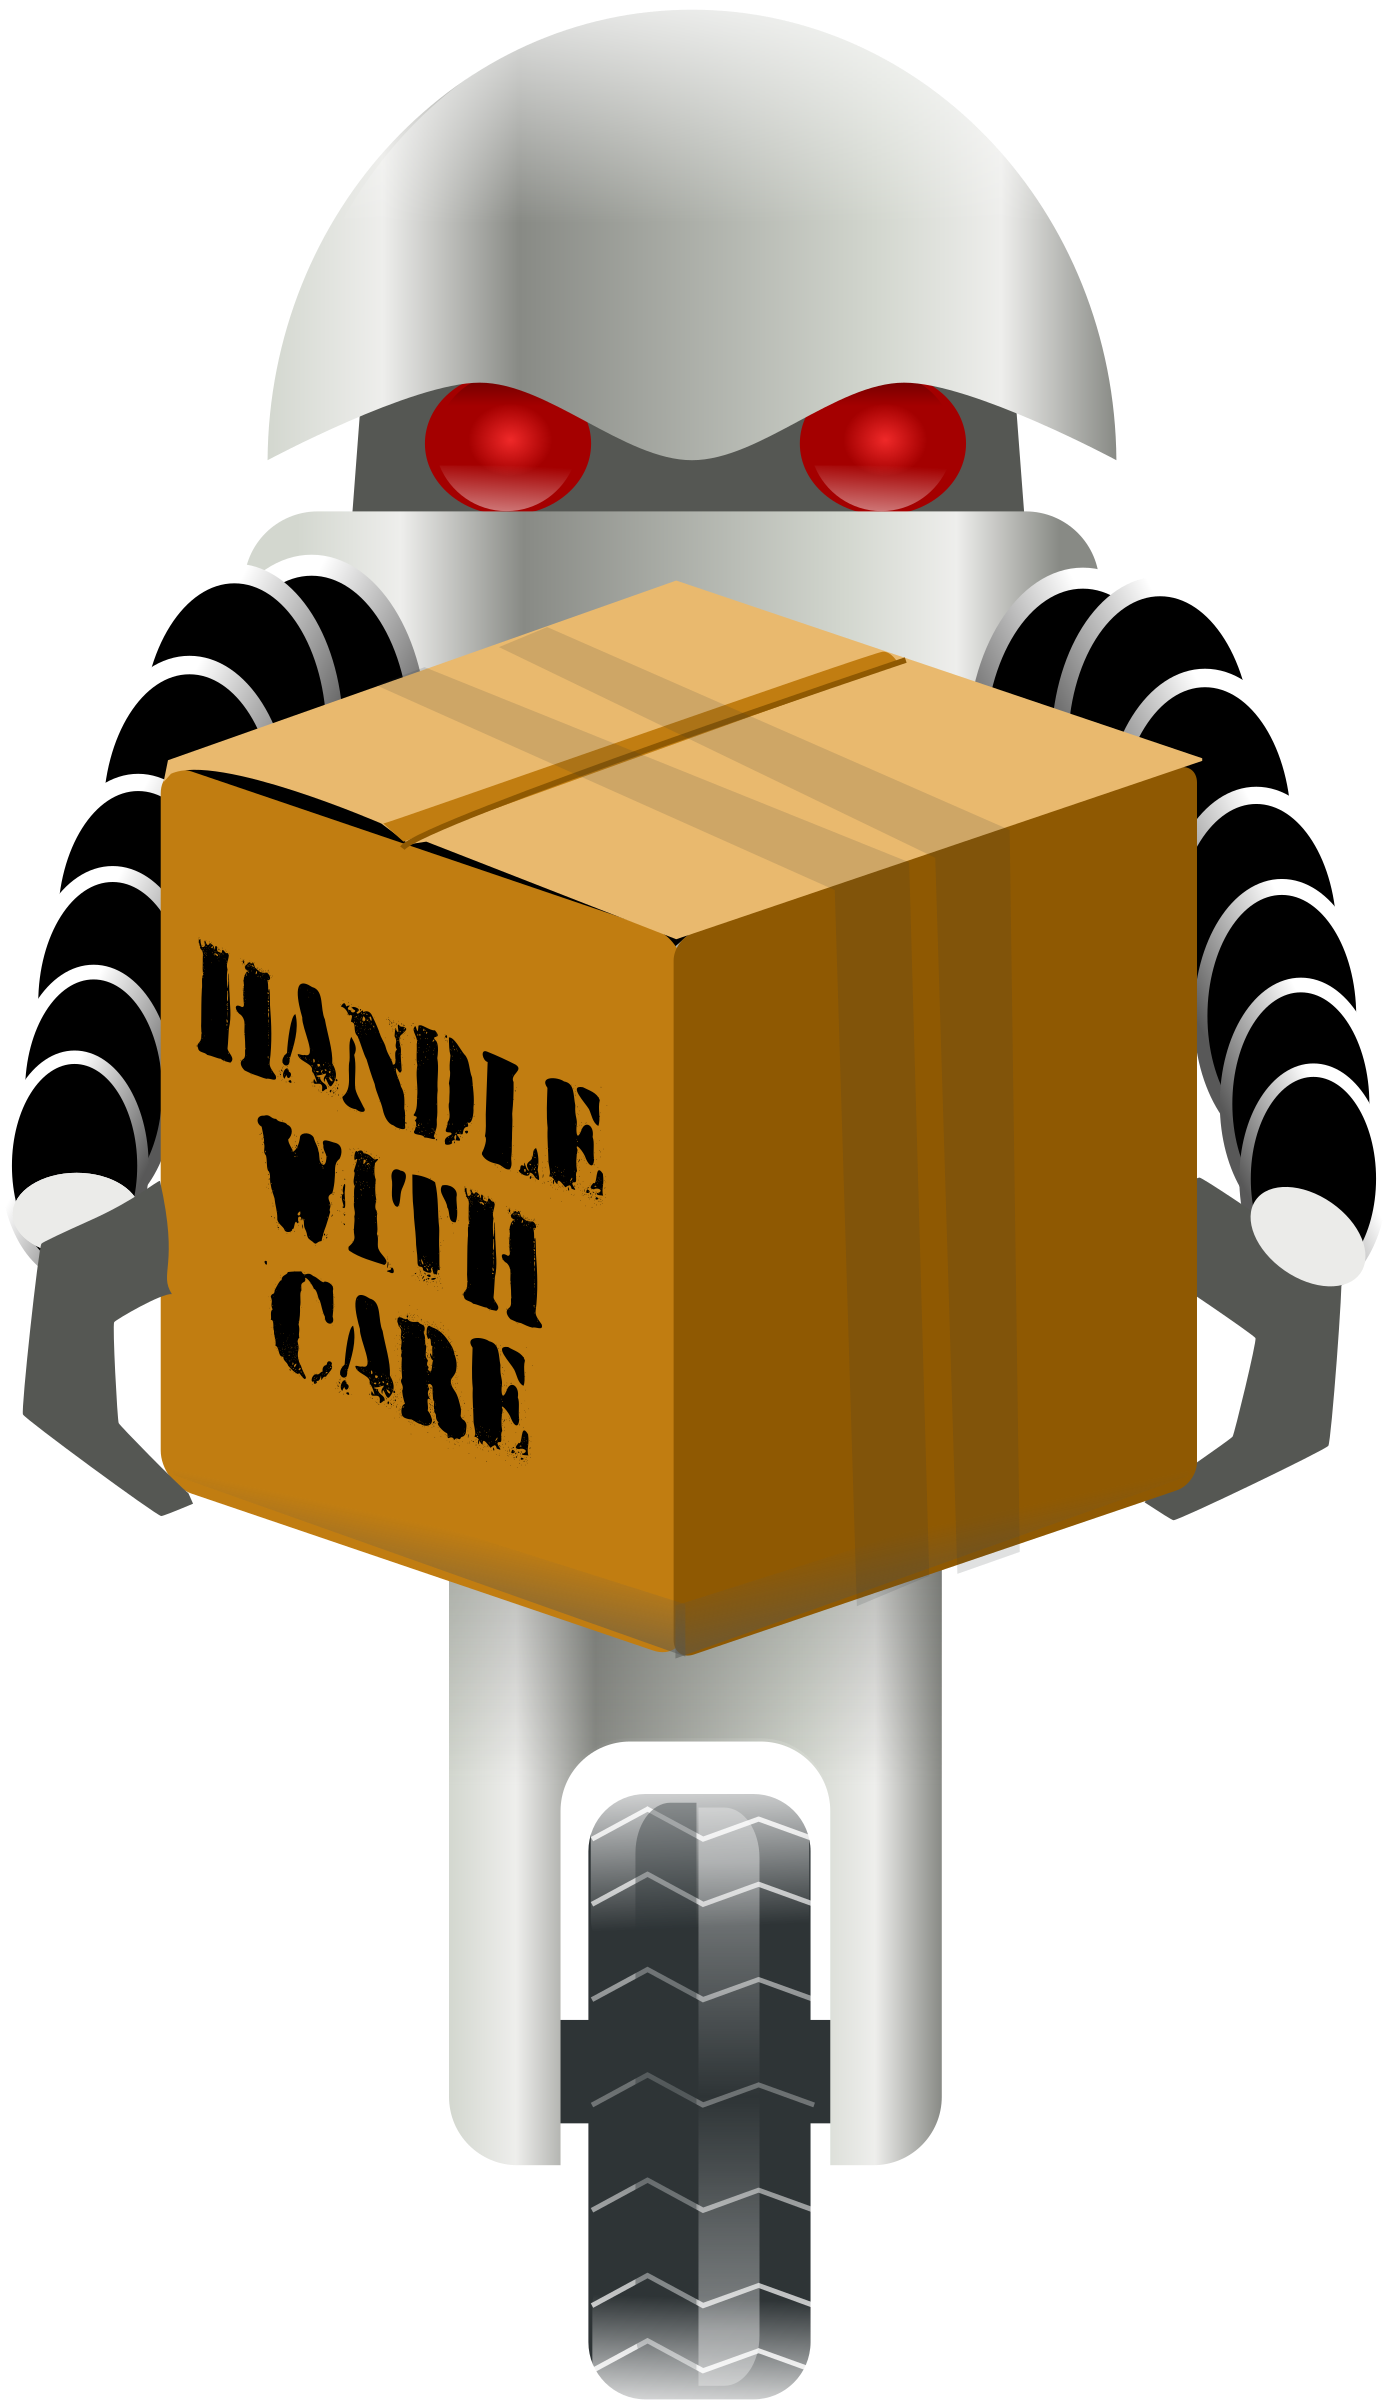 Robot carrying things by. Youtube clipart halo